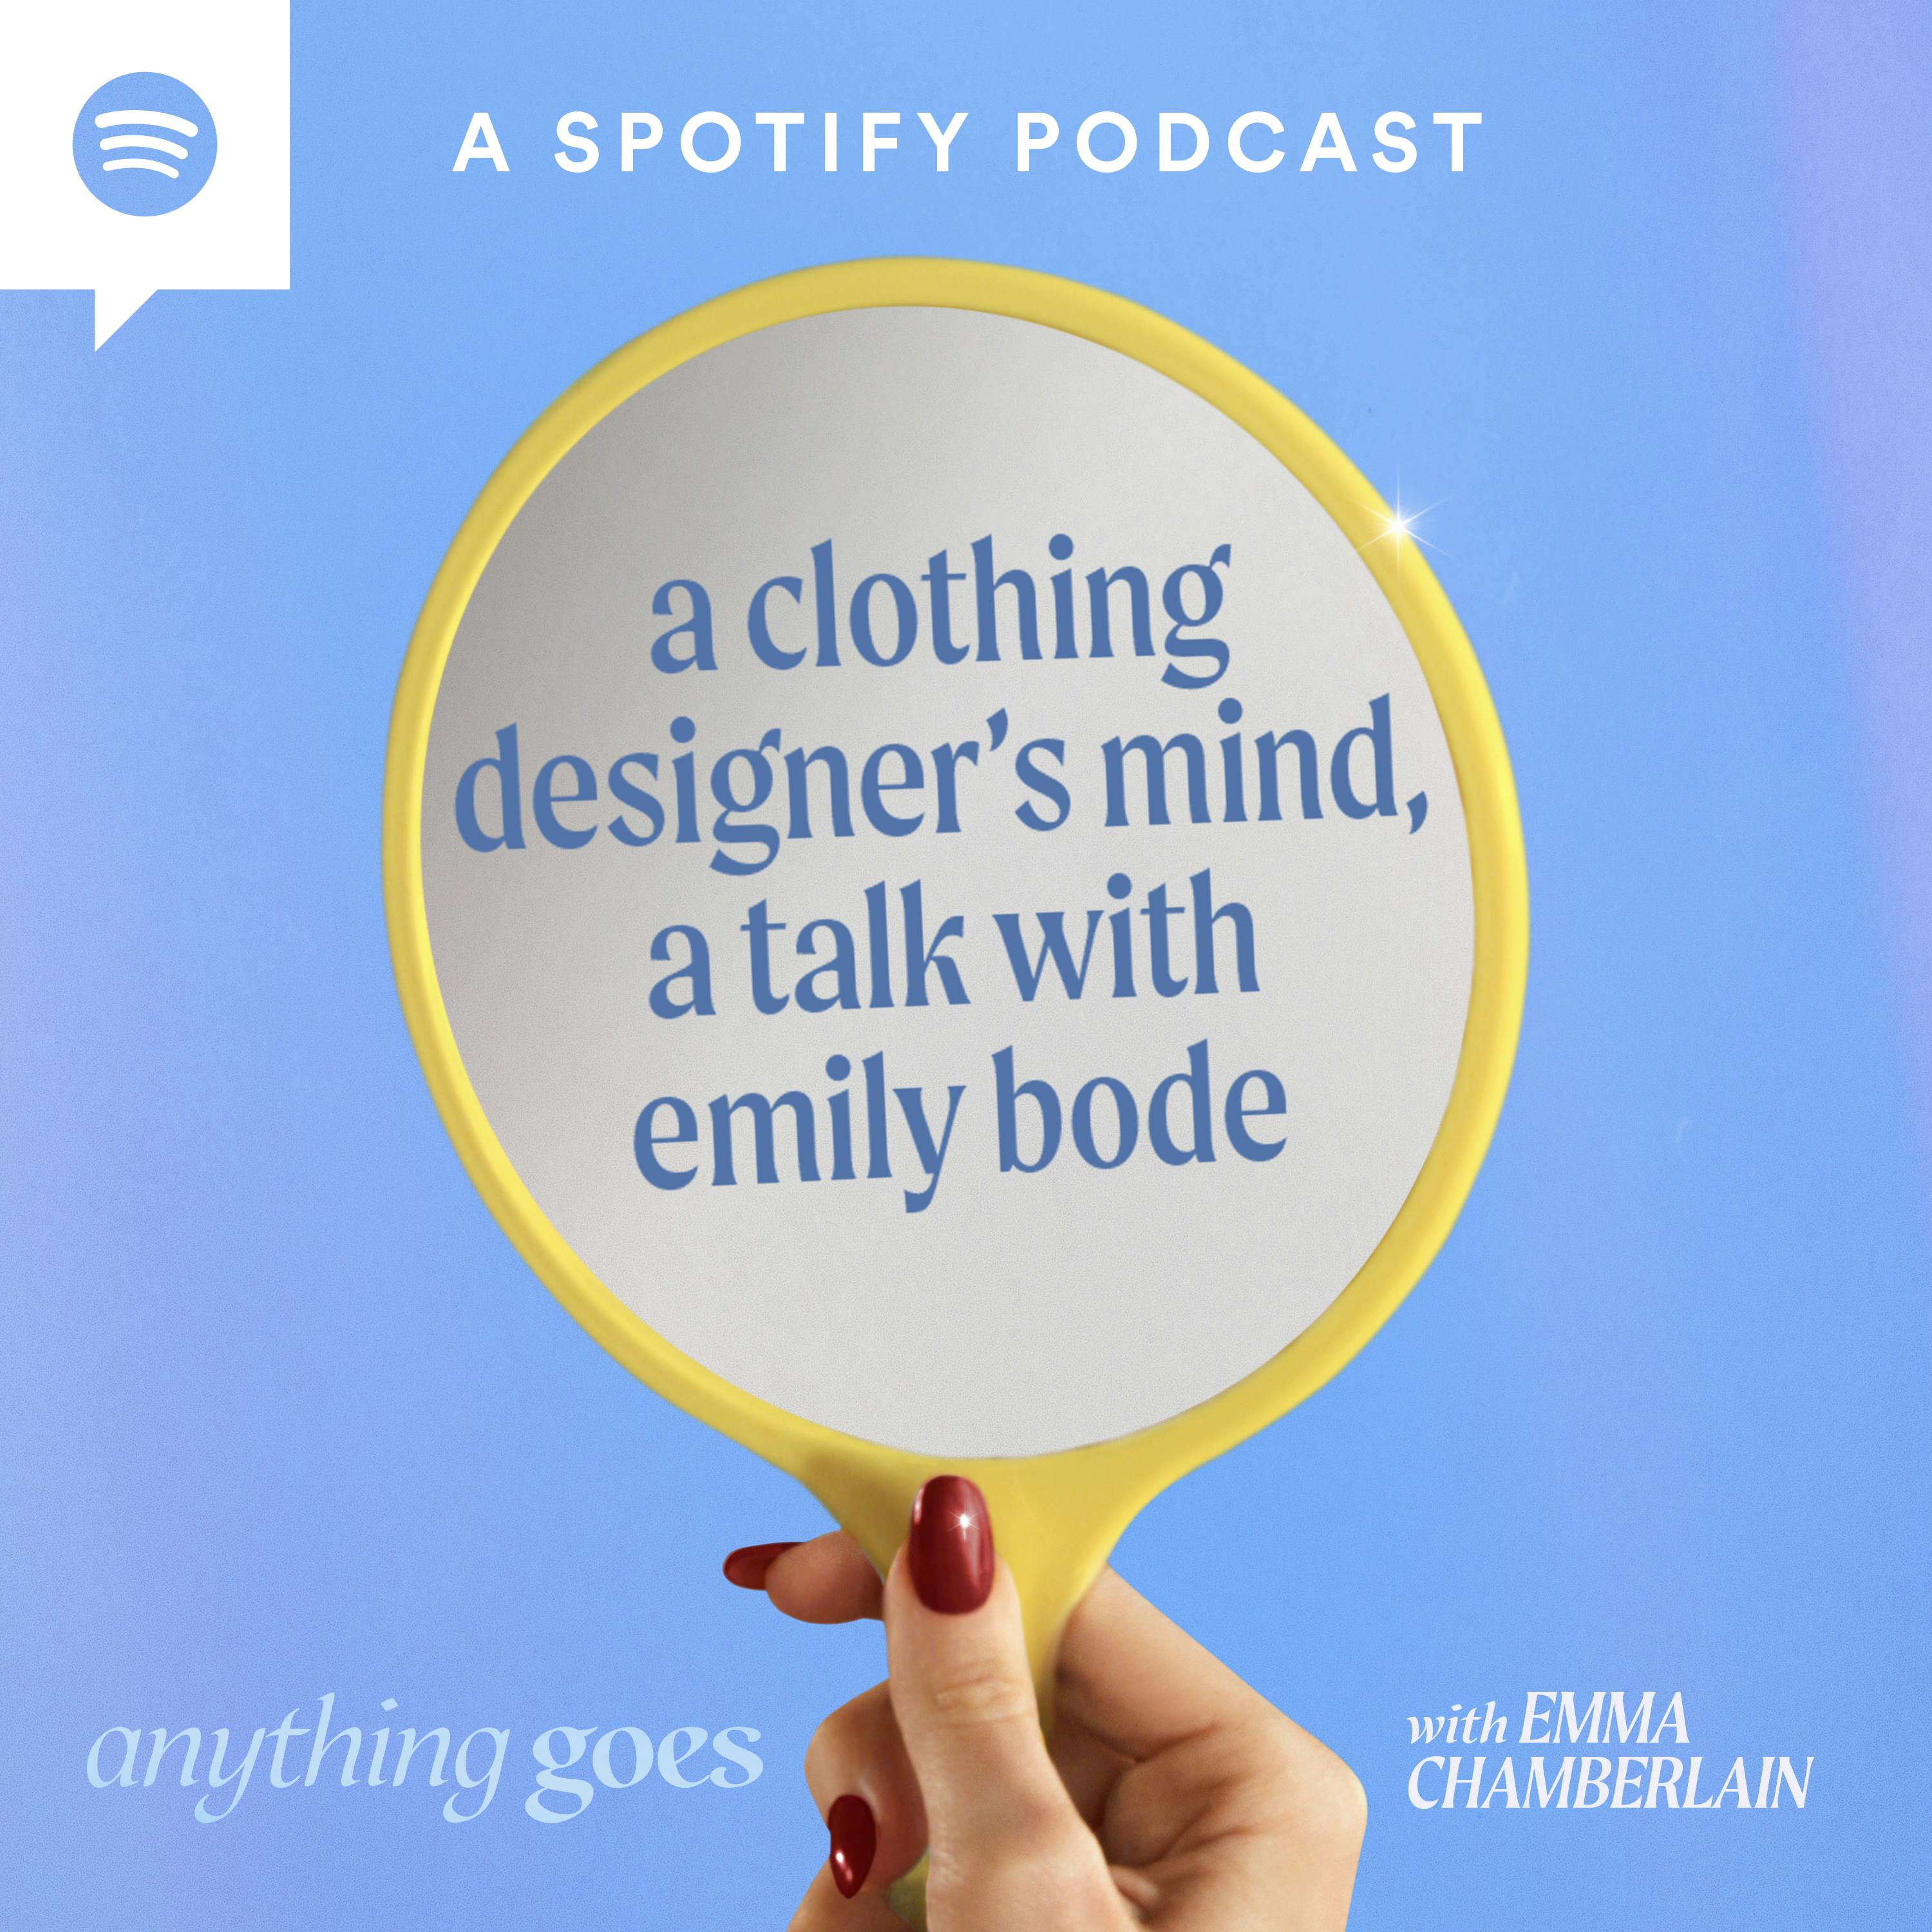 a clothing designer’s mind, a talk with emily bode [video]